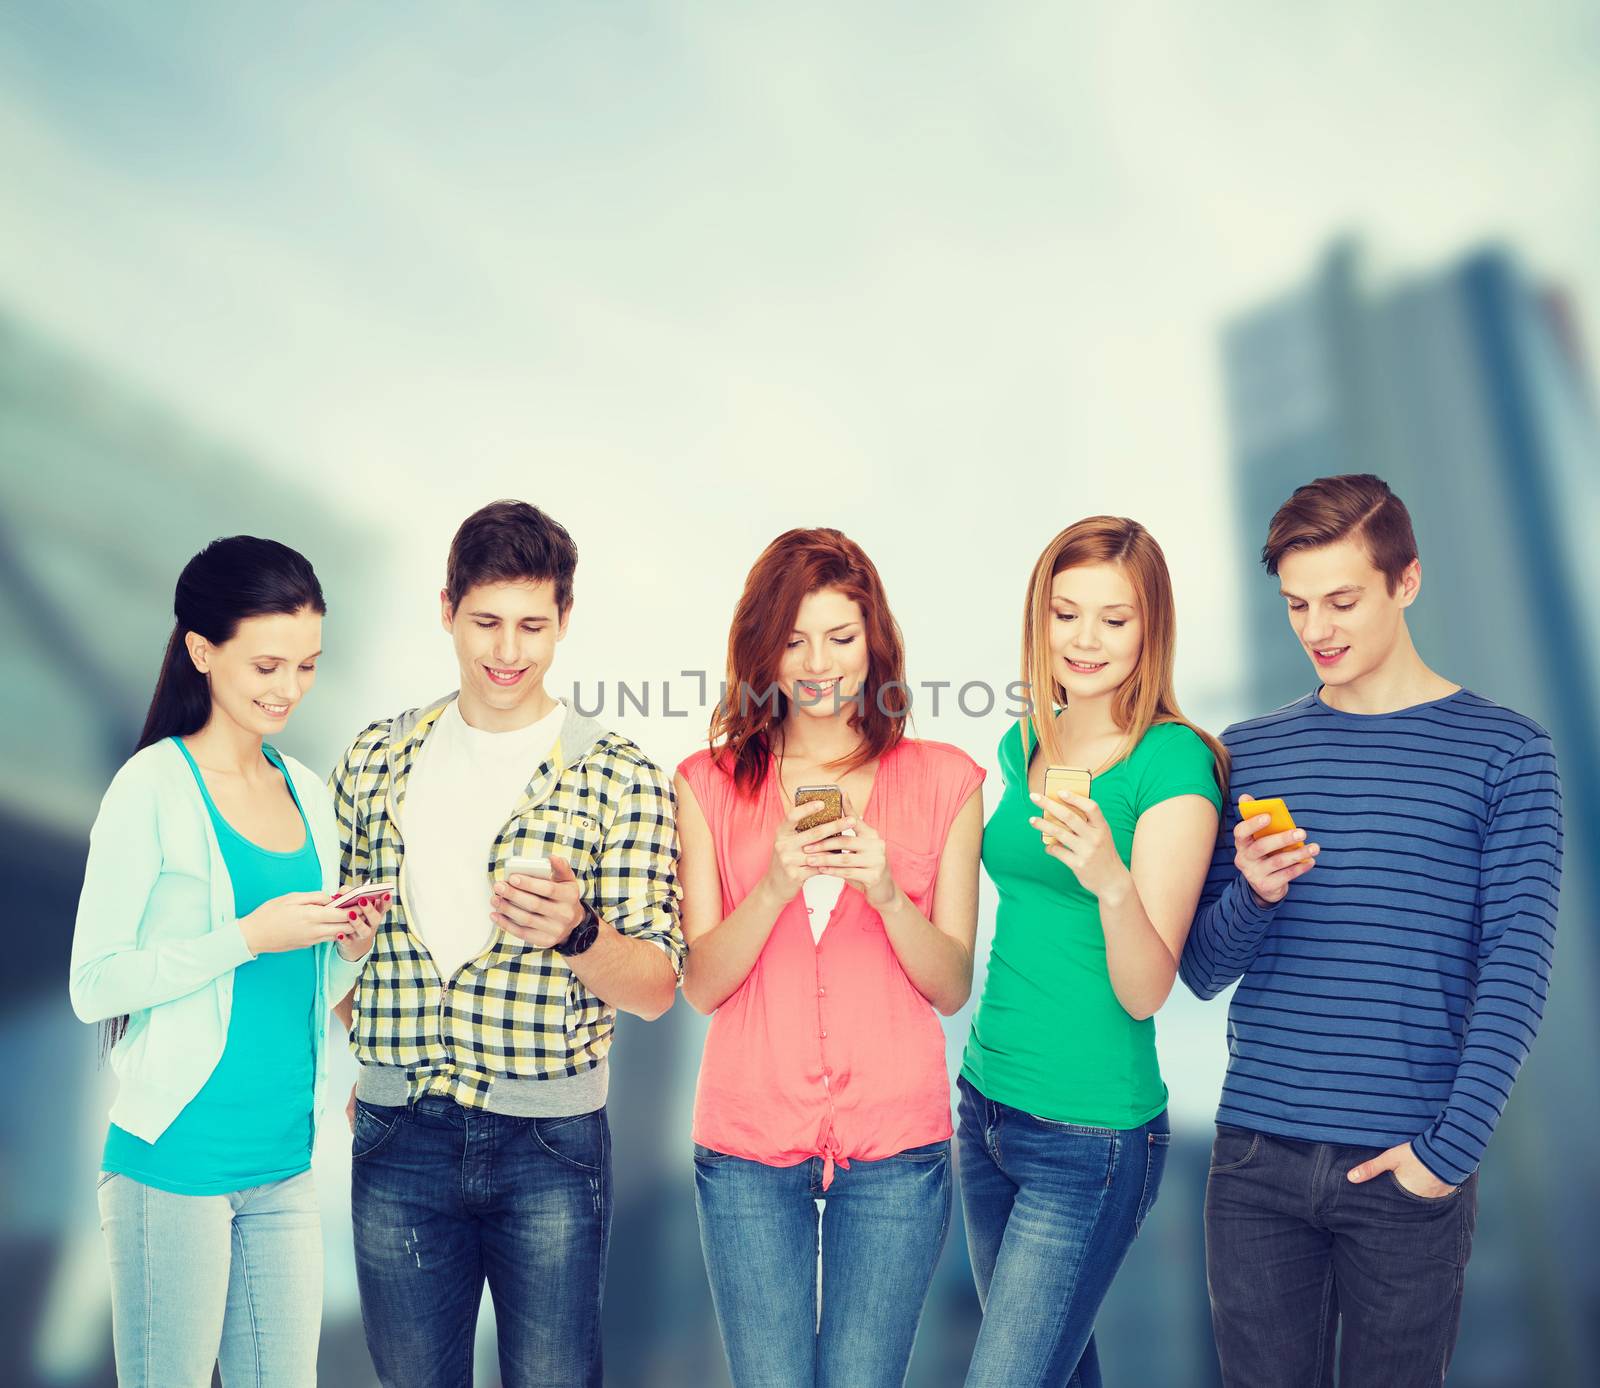 smiling students with smartphones by dolgachov